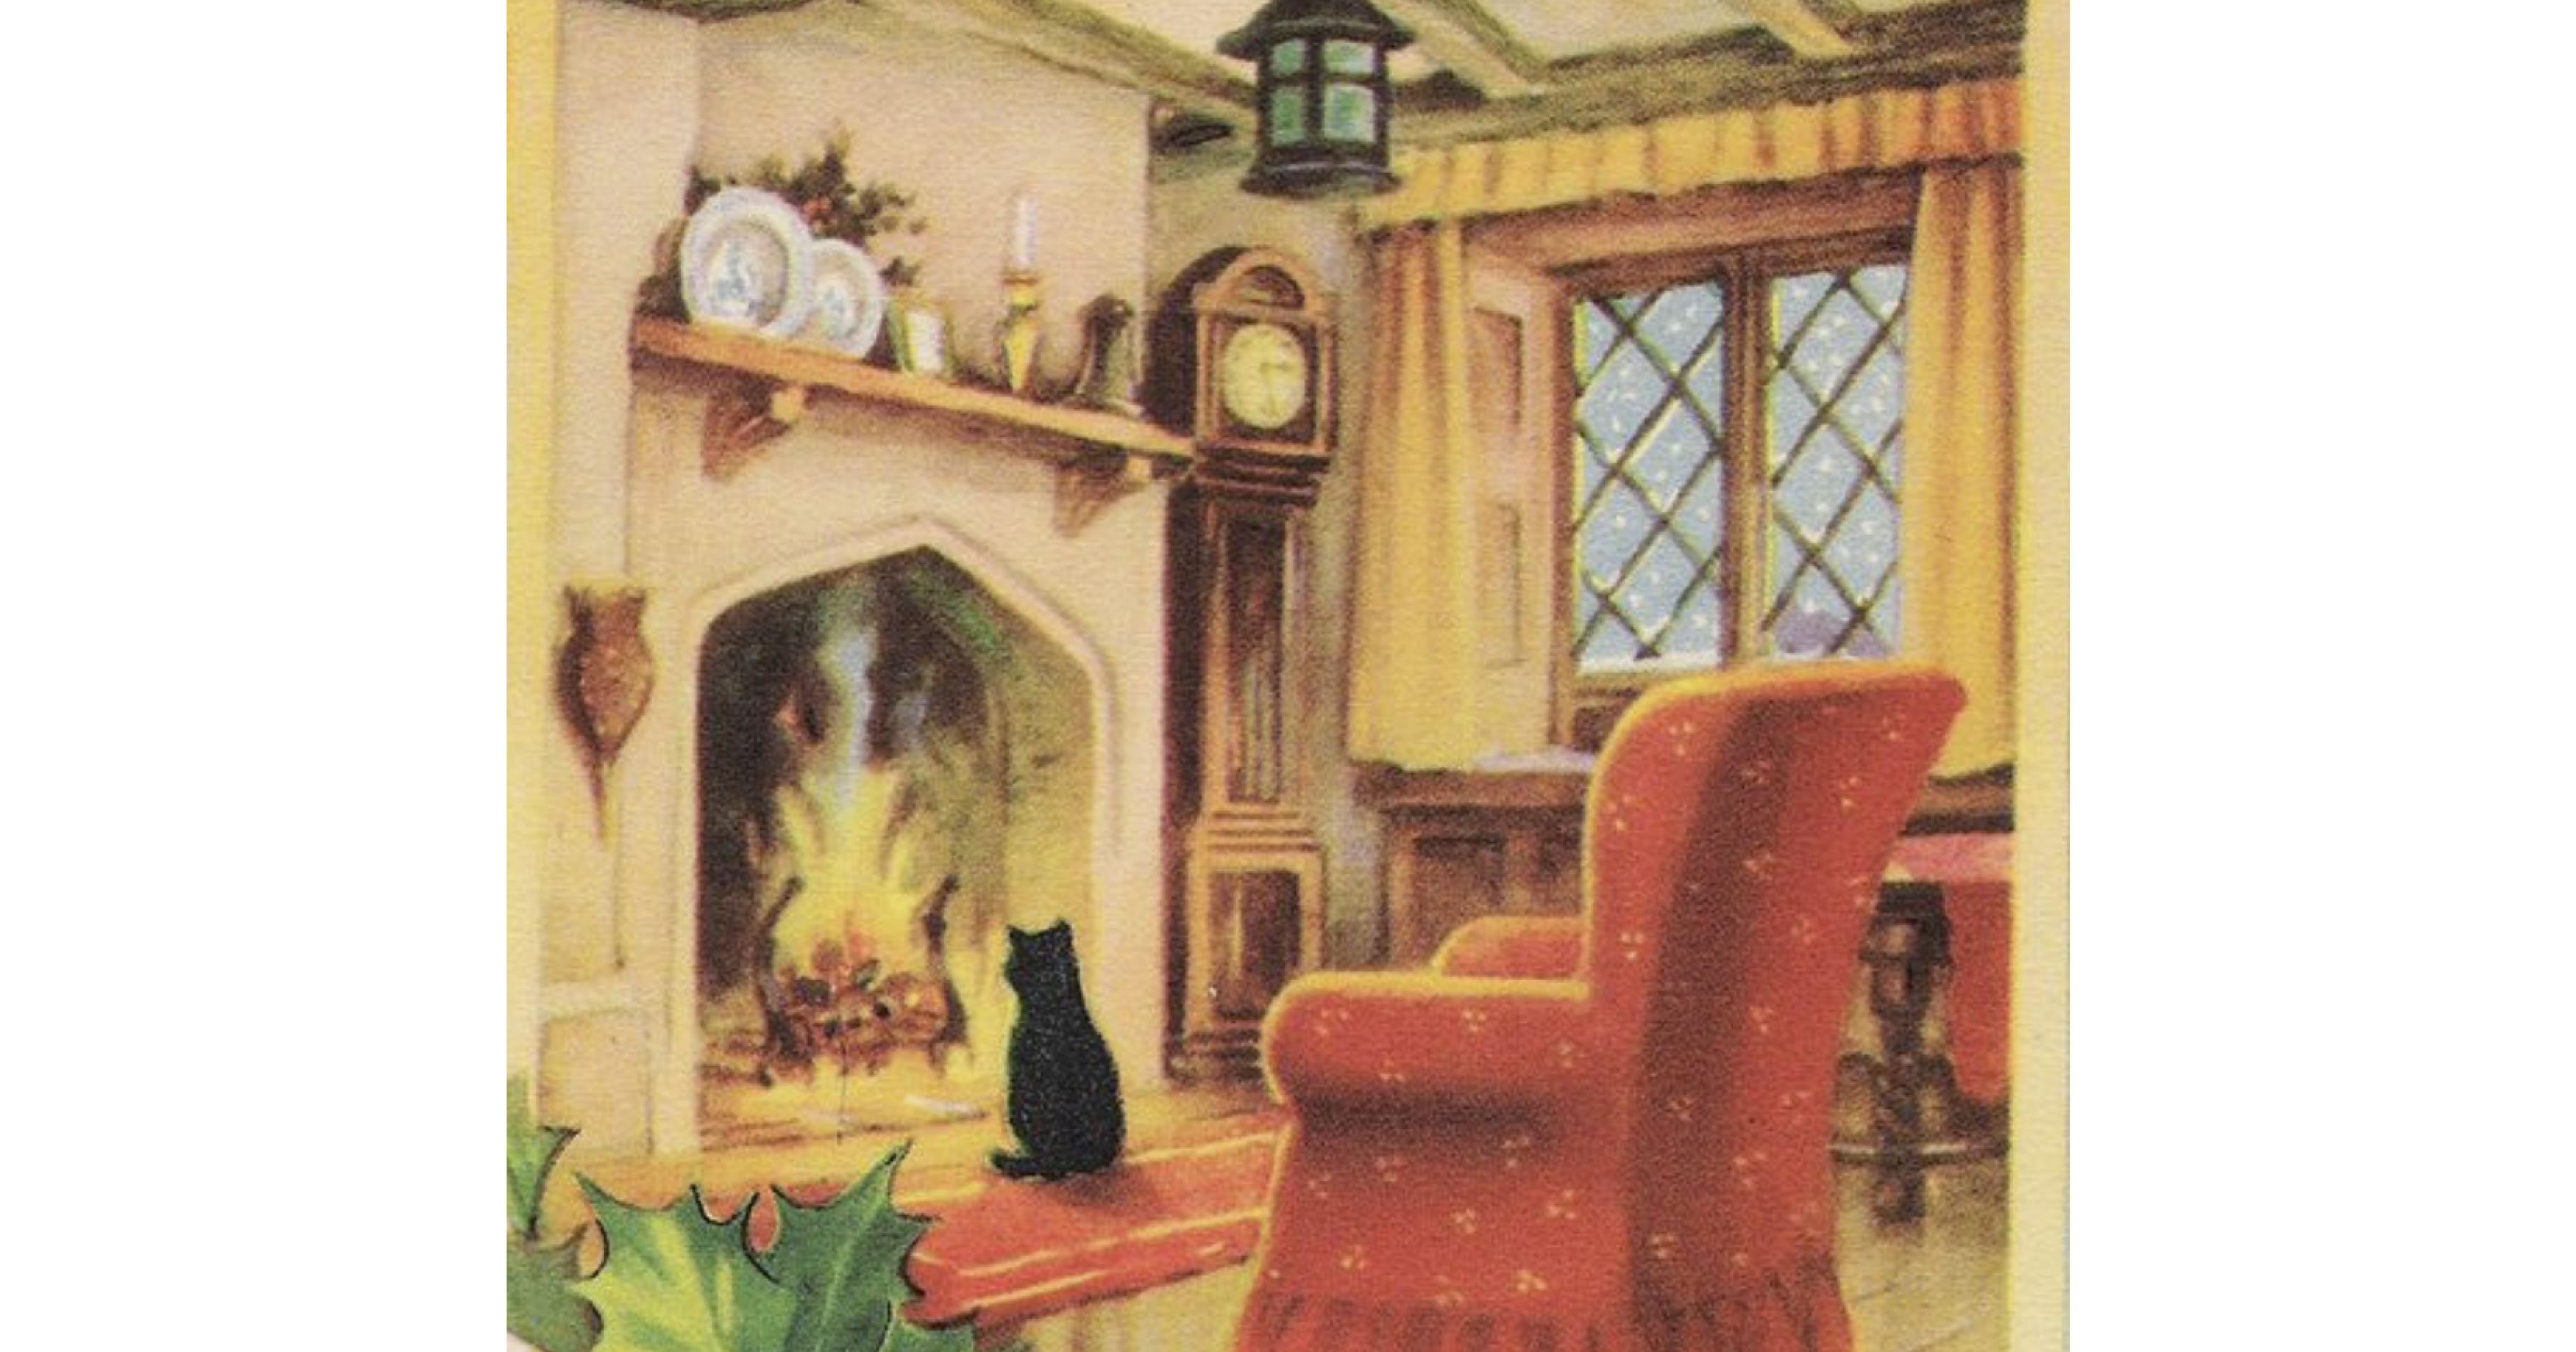 A cozy living scene with a cat standing in front of a fire